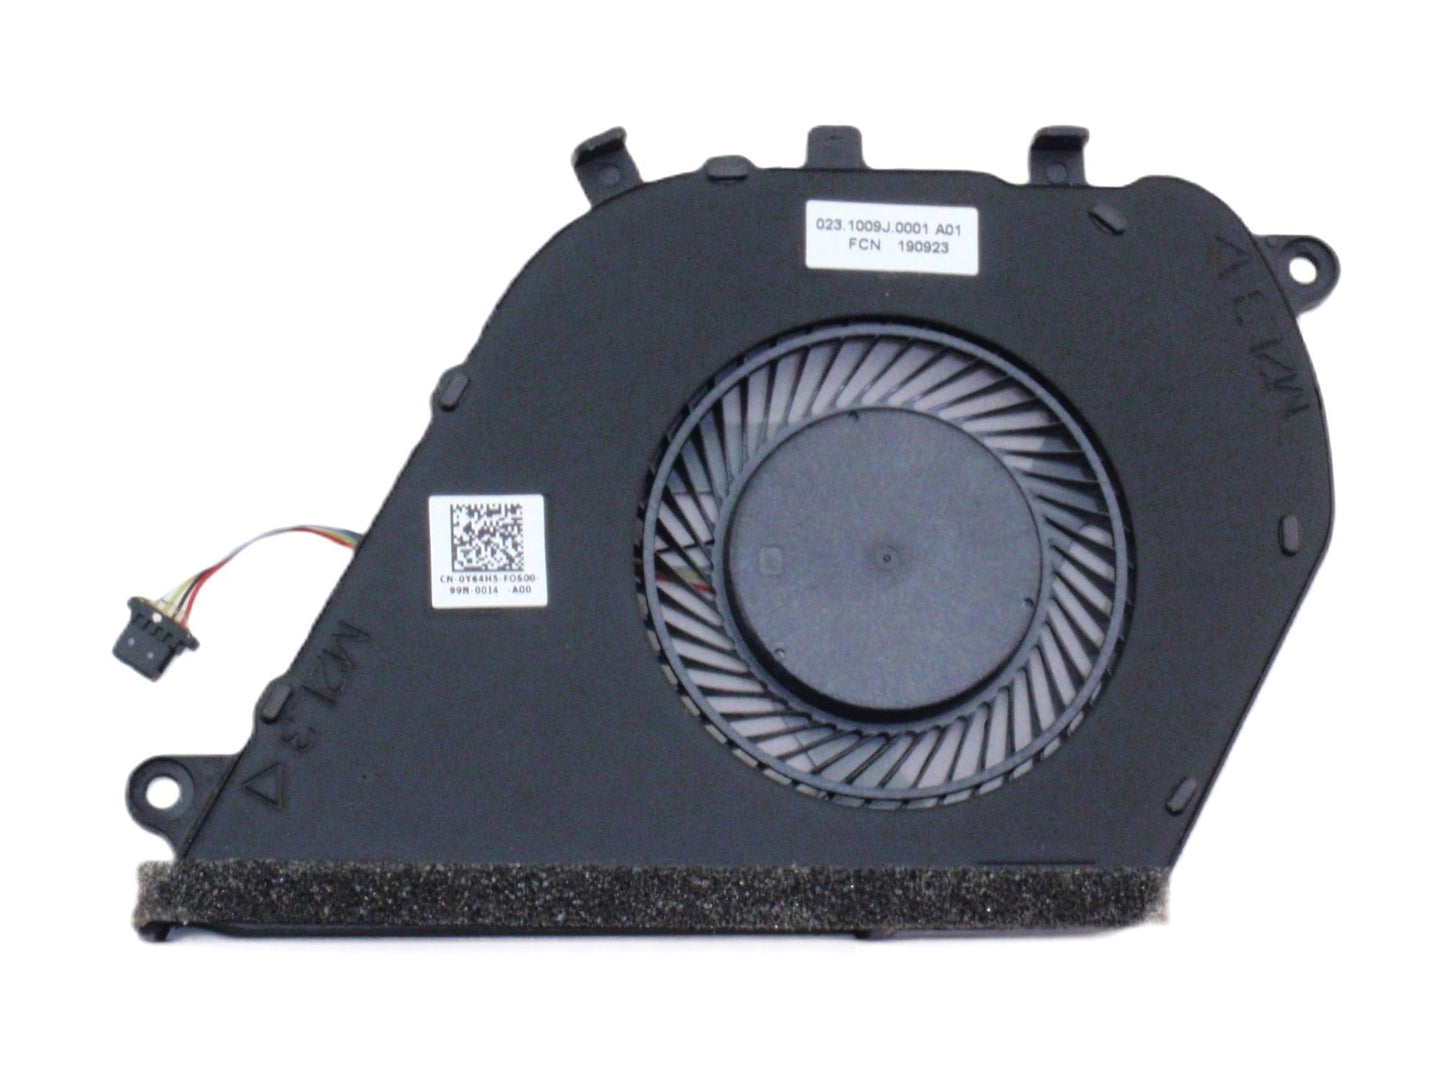 Dell New CPU Cooling Fan 023.1009J.0001 DFS541105FC0T-FJGY 0Y64H5 ND75B00-16M17 Inspiron 15 7570 7573 Y64H5